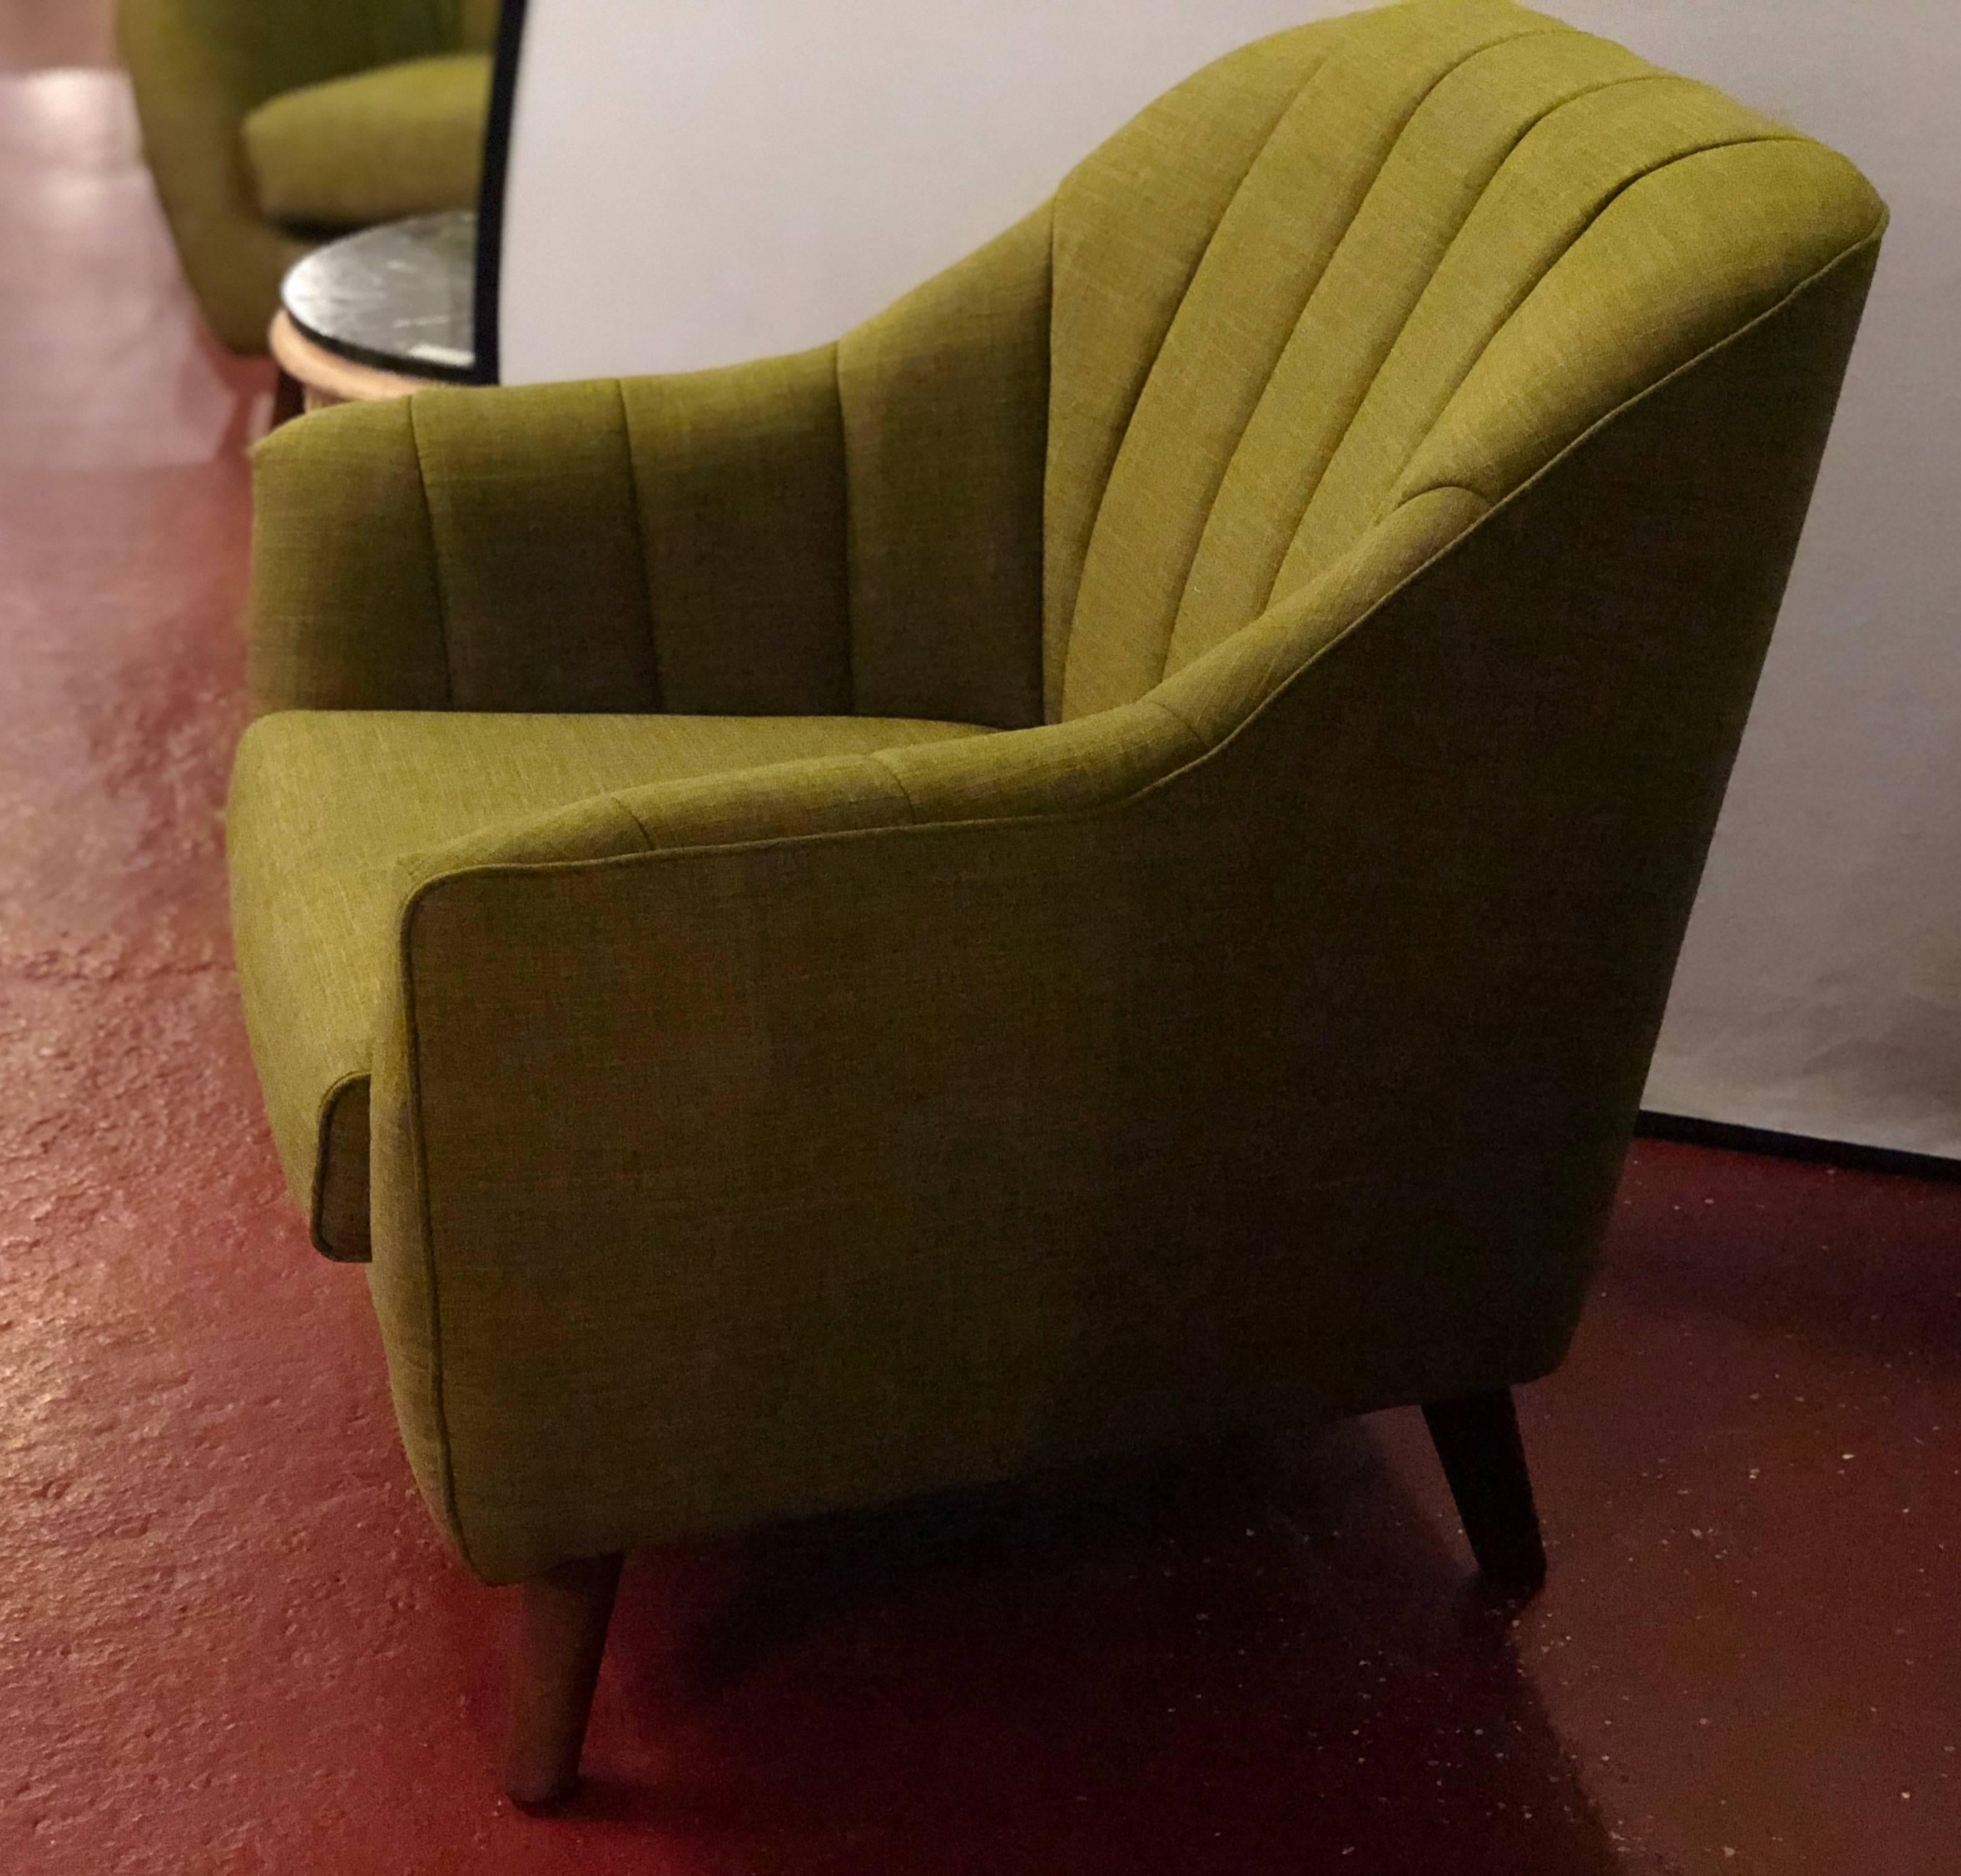 Pair of Mid-Century Modern style oversized chairs. Having a line tufted backrest this pair of very comfortable arm or lounge chairs would look wonderful in any setting. Each having a new olive green upholstery.